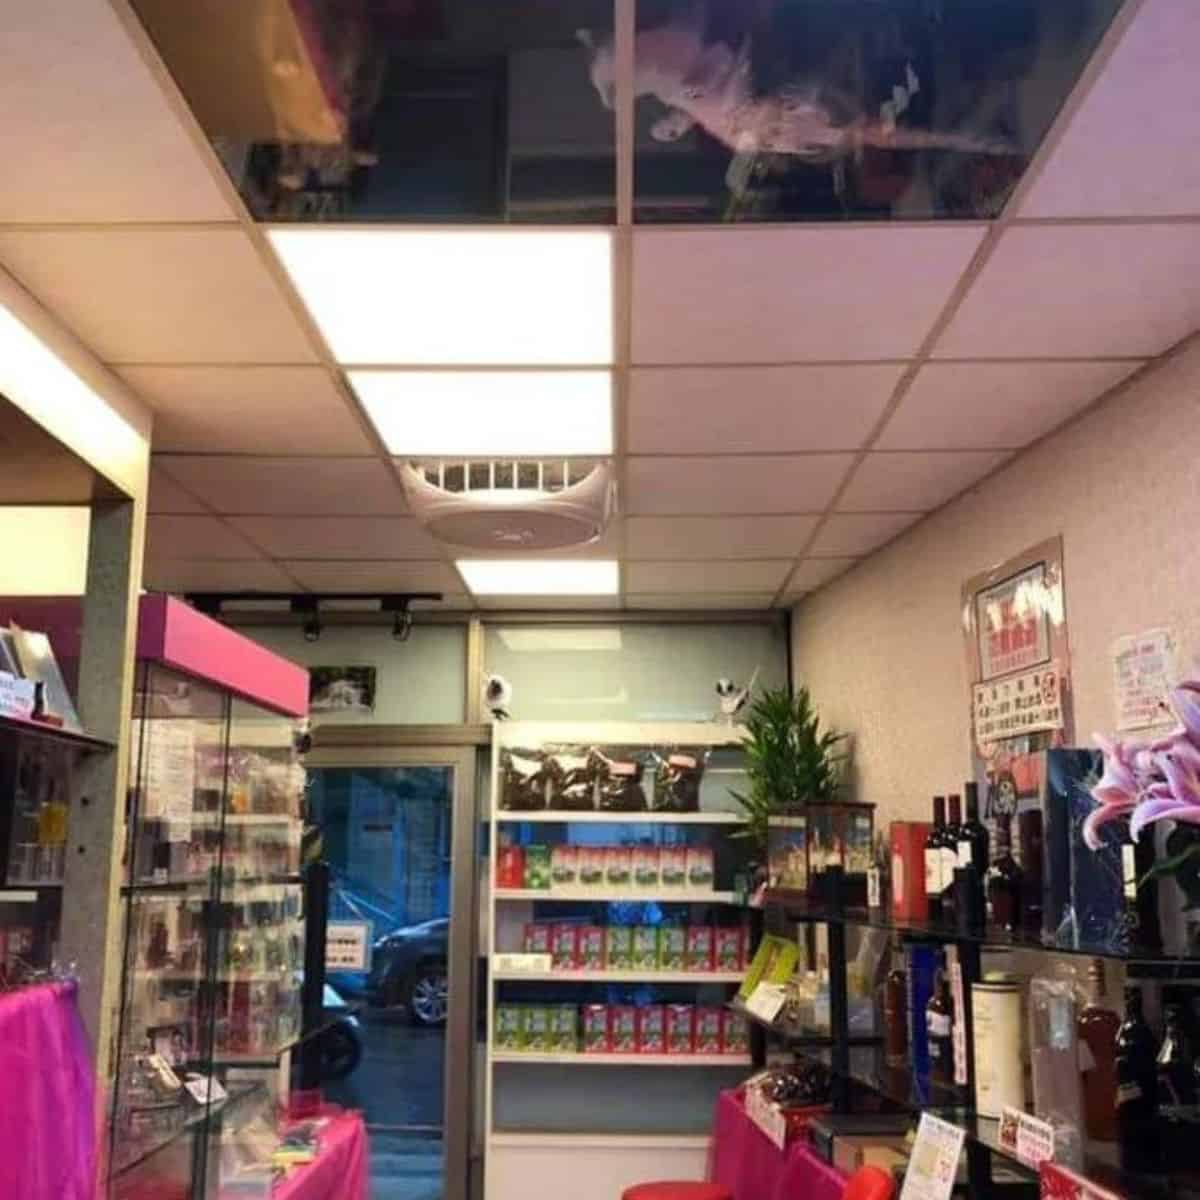 Shop with two cats in ceiling